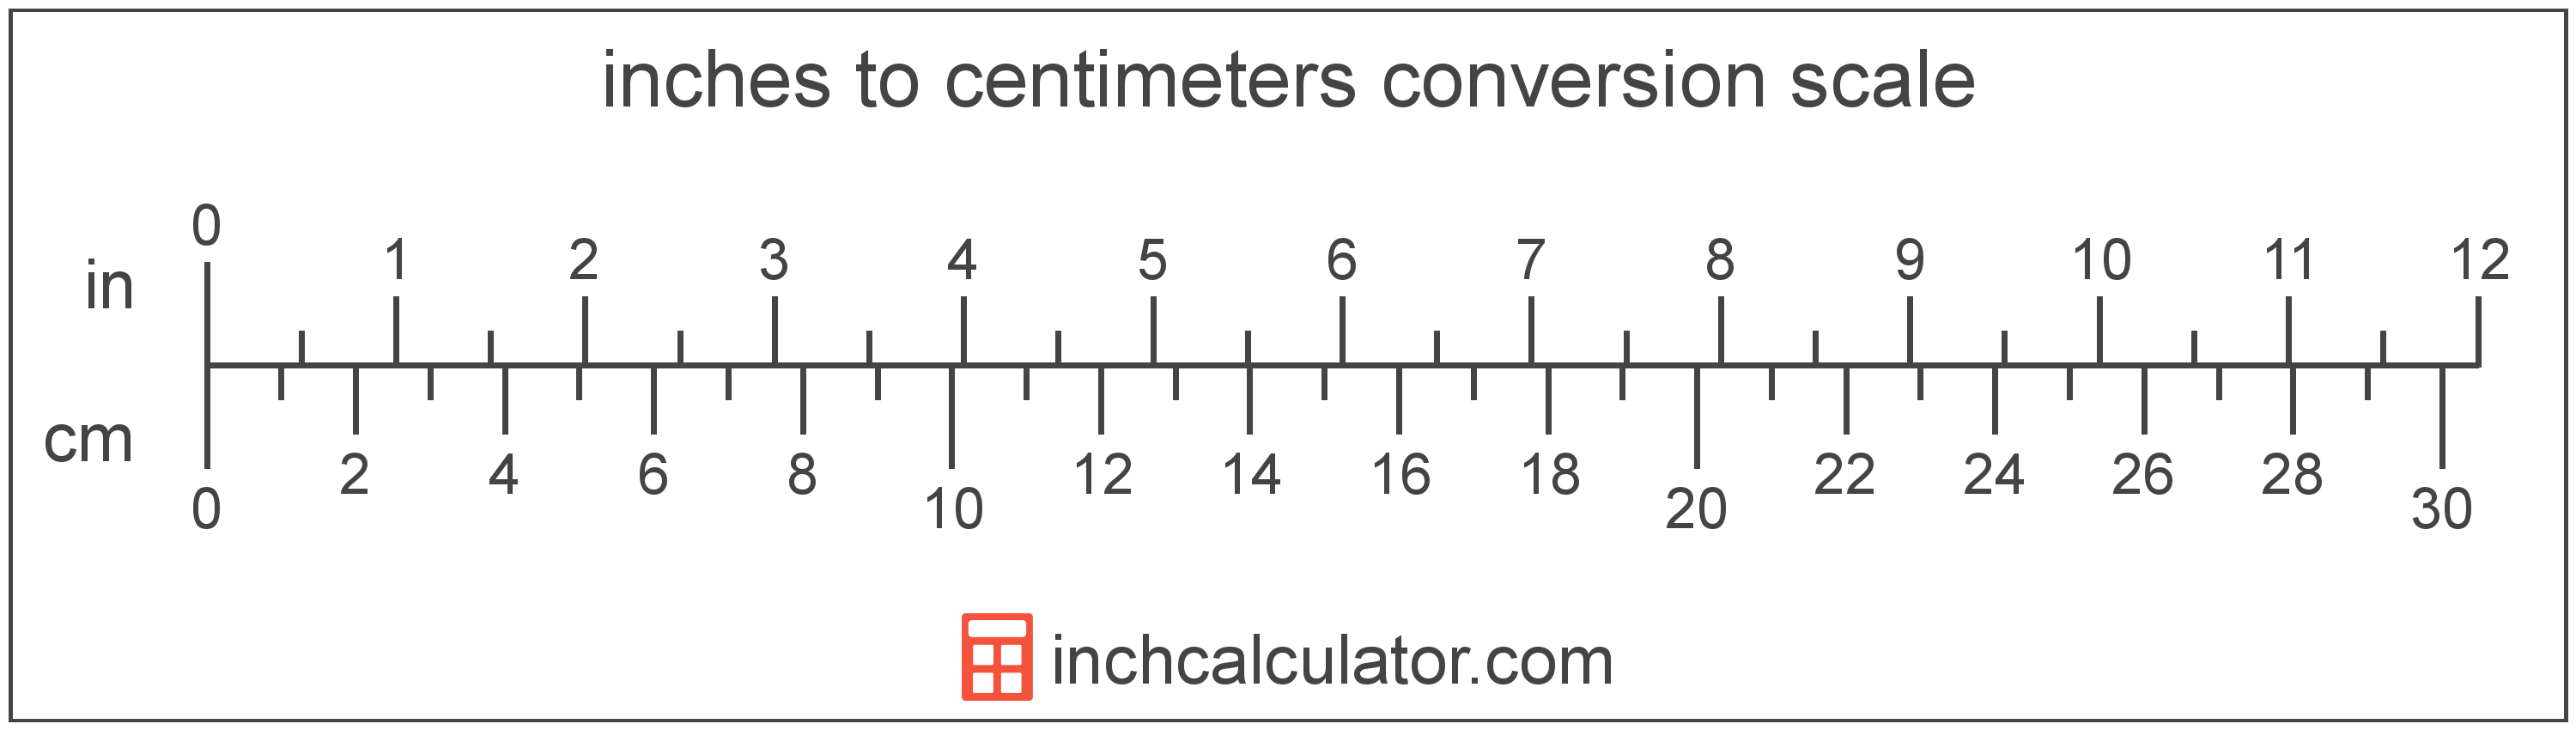 500 centimeters is equal to how many meters